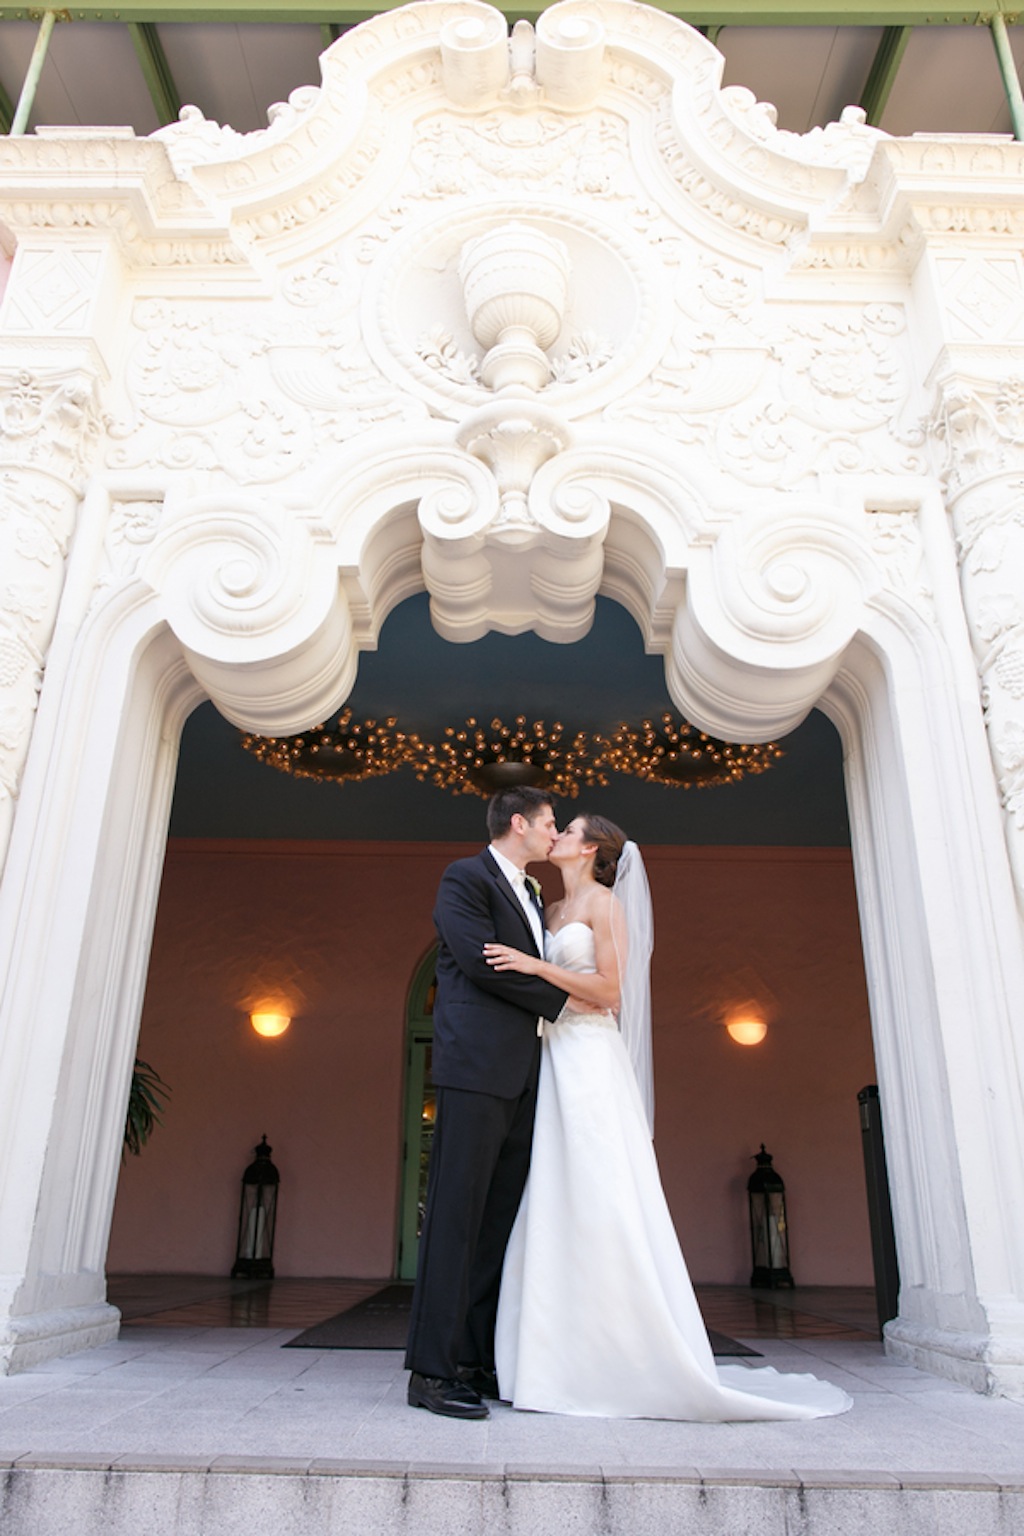 Renaissance Vinoy Bride & Groom on Wedding Day | Carrie Wildes Photography